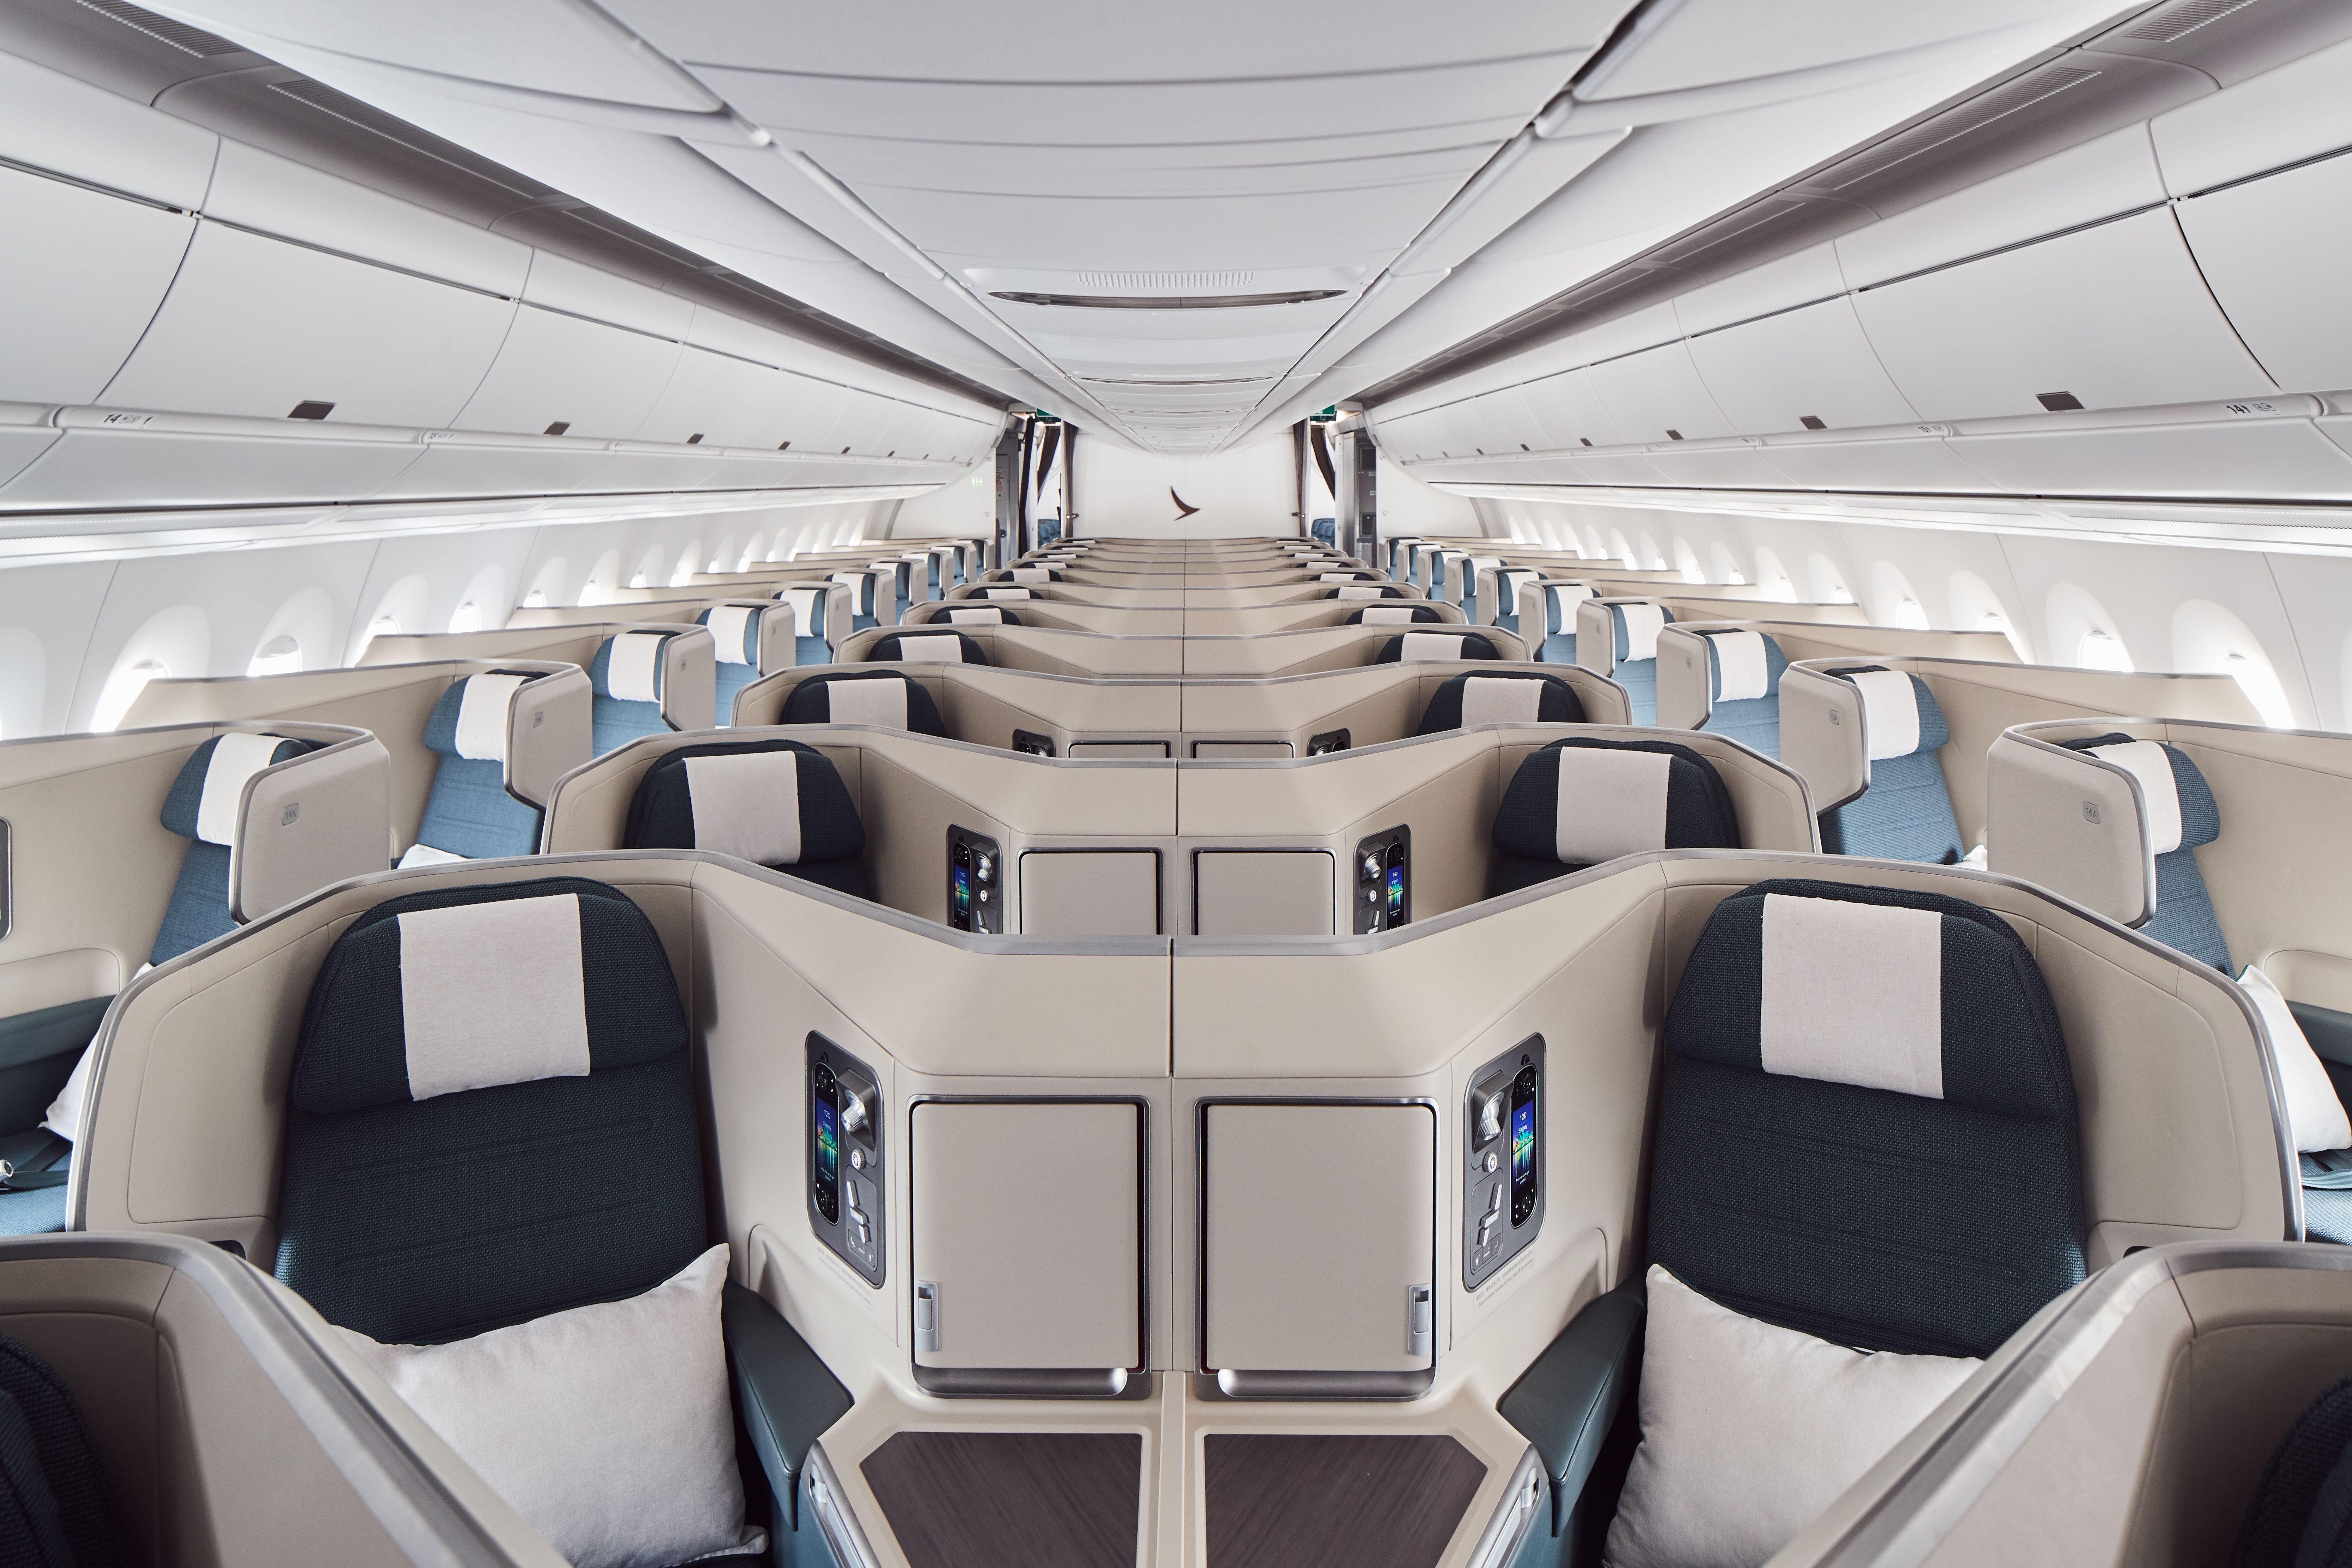 Cathay Pacific Airbus A350-1000 business class